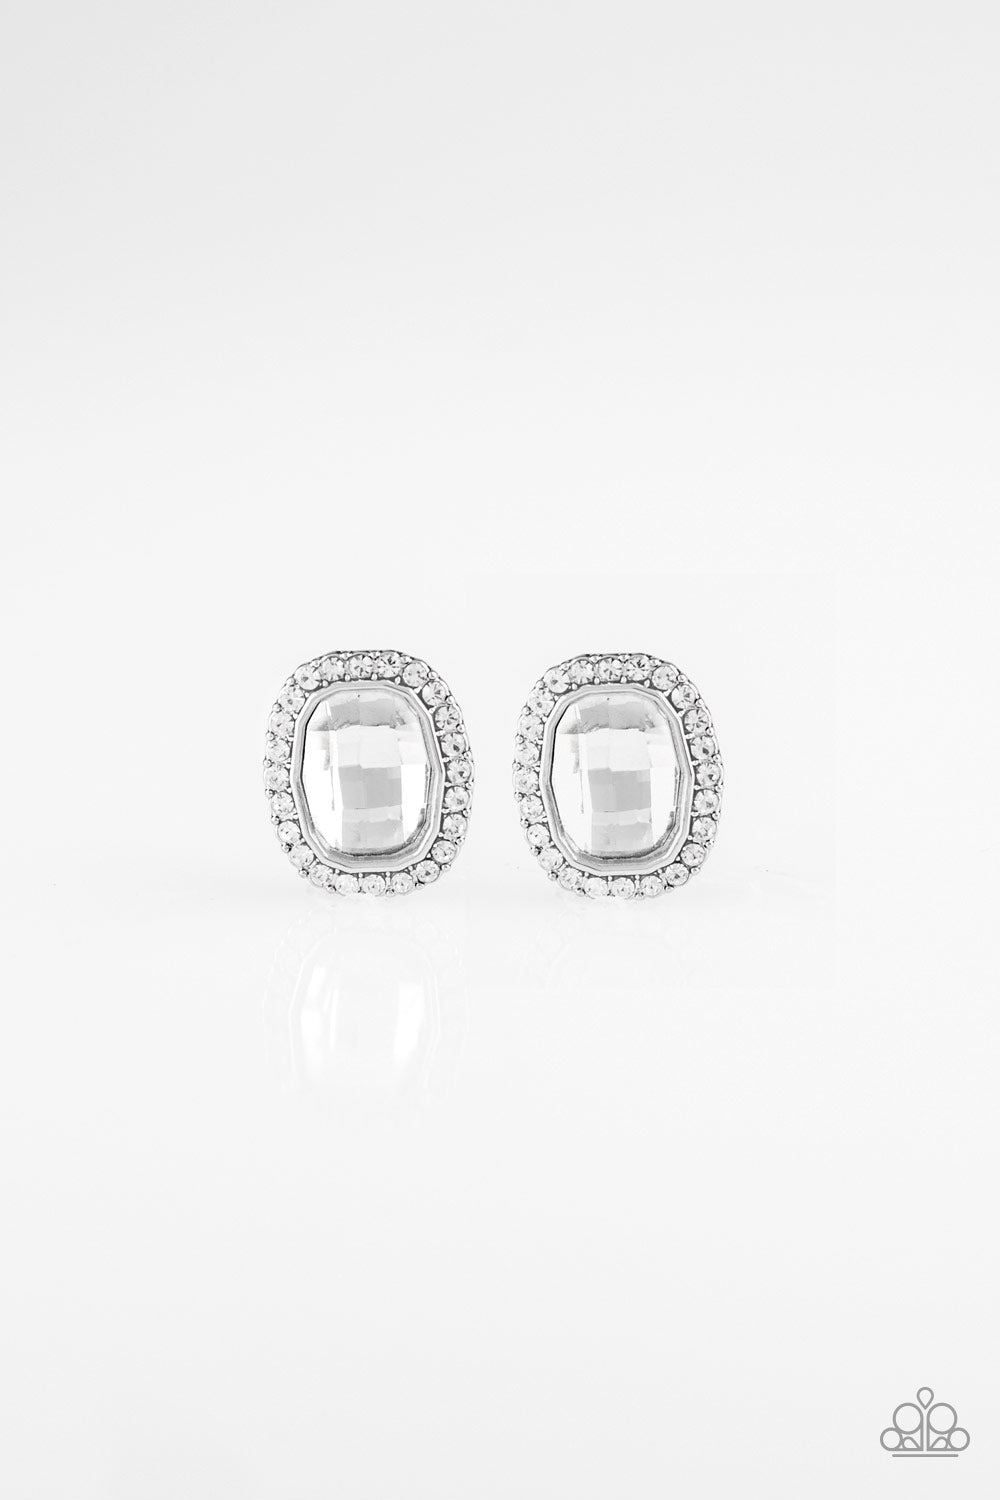 &lt;p&gt;A faceted white gem is pressed into a shimmery silver frame radiating with glassy white rhinestones for a timeless fashion. Earring attaches to a standard post fitting. &lt;/p&gt;

&lt;P&gt; &lt;I&gt;Sold as one pair of post earrings.&lt;/I&gt;&lt;/P&gt;


&lt;img src=\&quot;https://d9b54x484lq62.cloudfront.net/paparazzi/shopping/images/517_tag150x115_1.png\&quot; alt=\&quot;New Kit\&quot; align=\&quot;middle\&quot; height=\&quot;50\&quot; width=\&quot;50\&quot;/&gt;